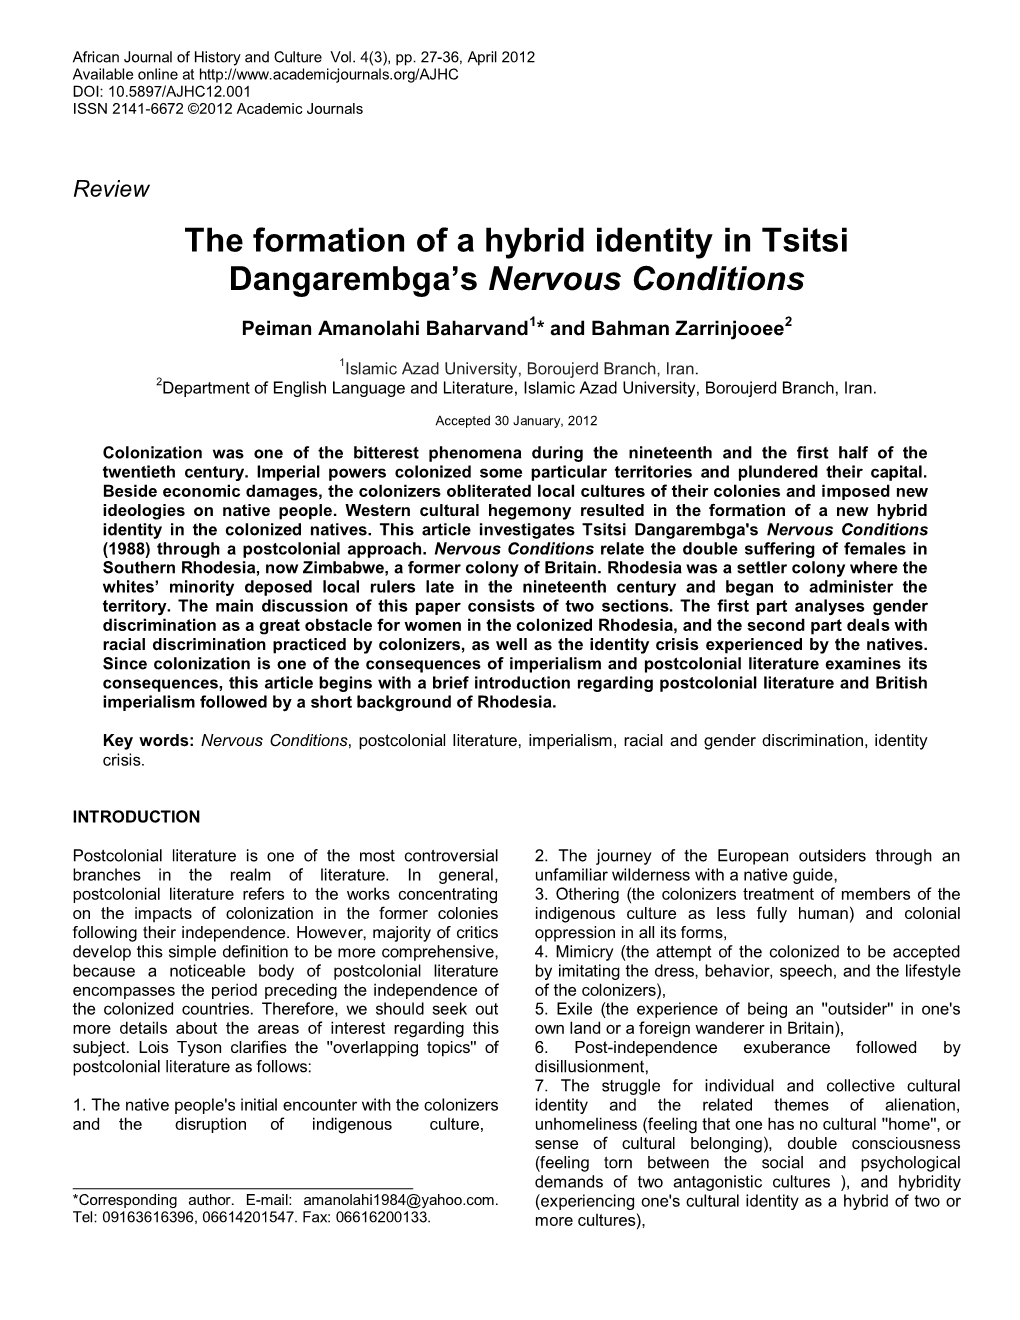 The Formation of a Hybrid Identity in Tsitsi Dangarembga's Nervous